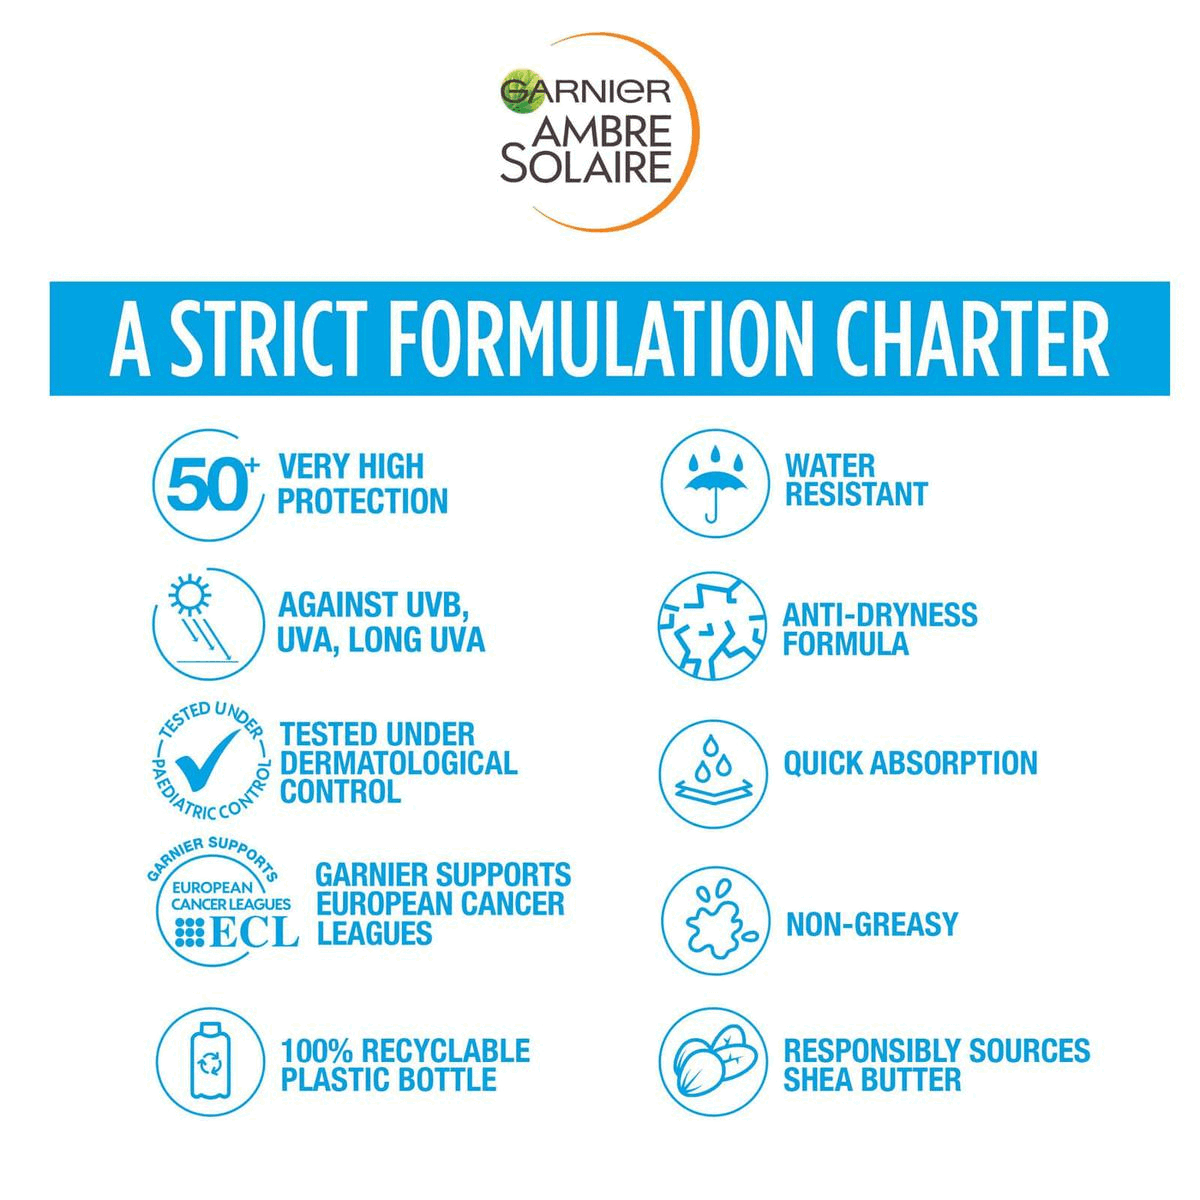 A strict formulation charter.How to use the product.New improved formulas and recycled/recyclable packaging